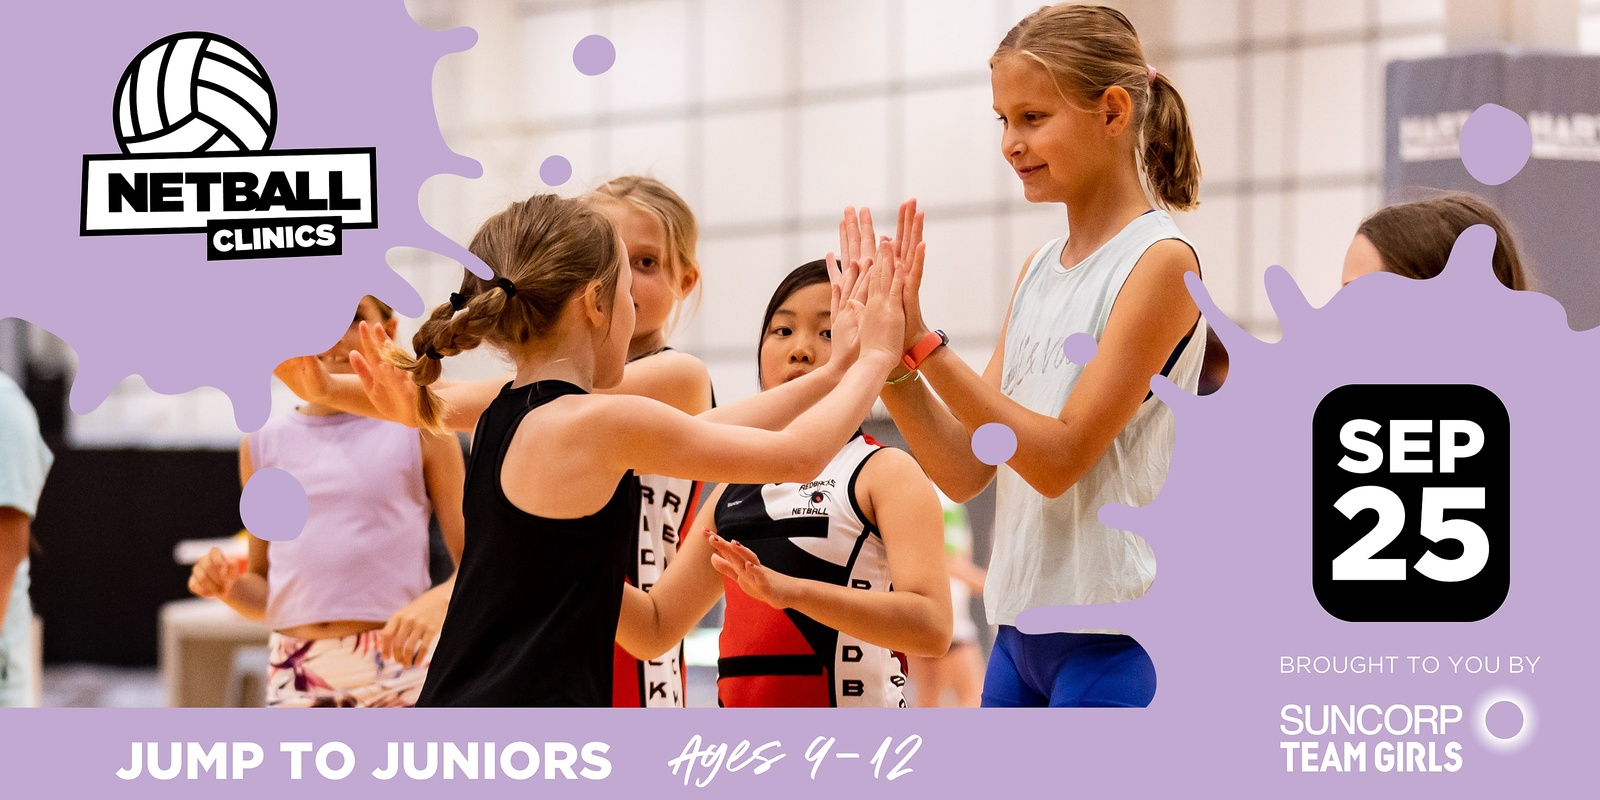 Banner image for JUMP TO JUNIORS CLINIC (25 SEP) - NISSAN ARENA - AGES 9 - 12